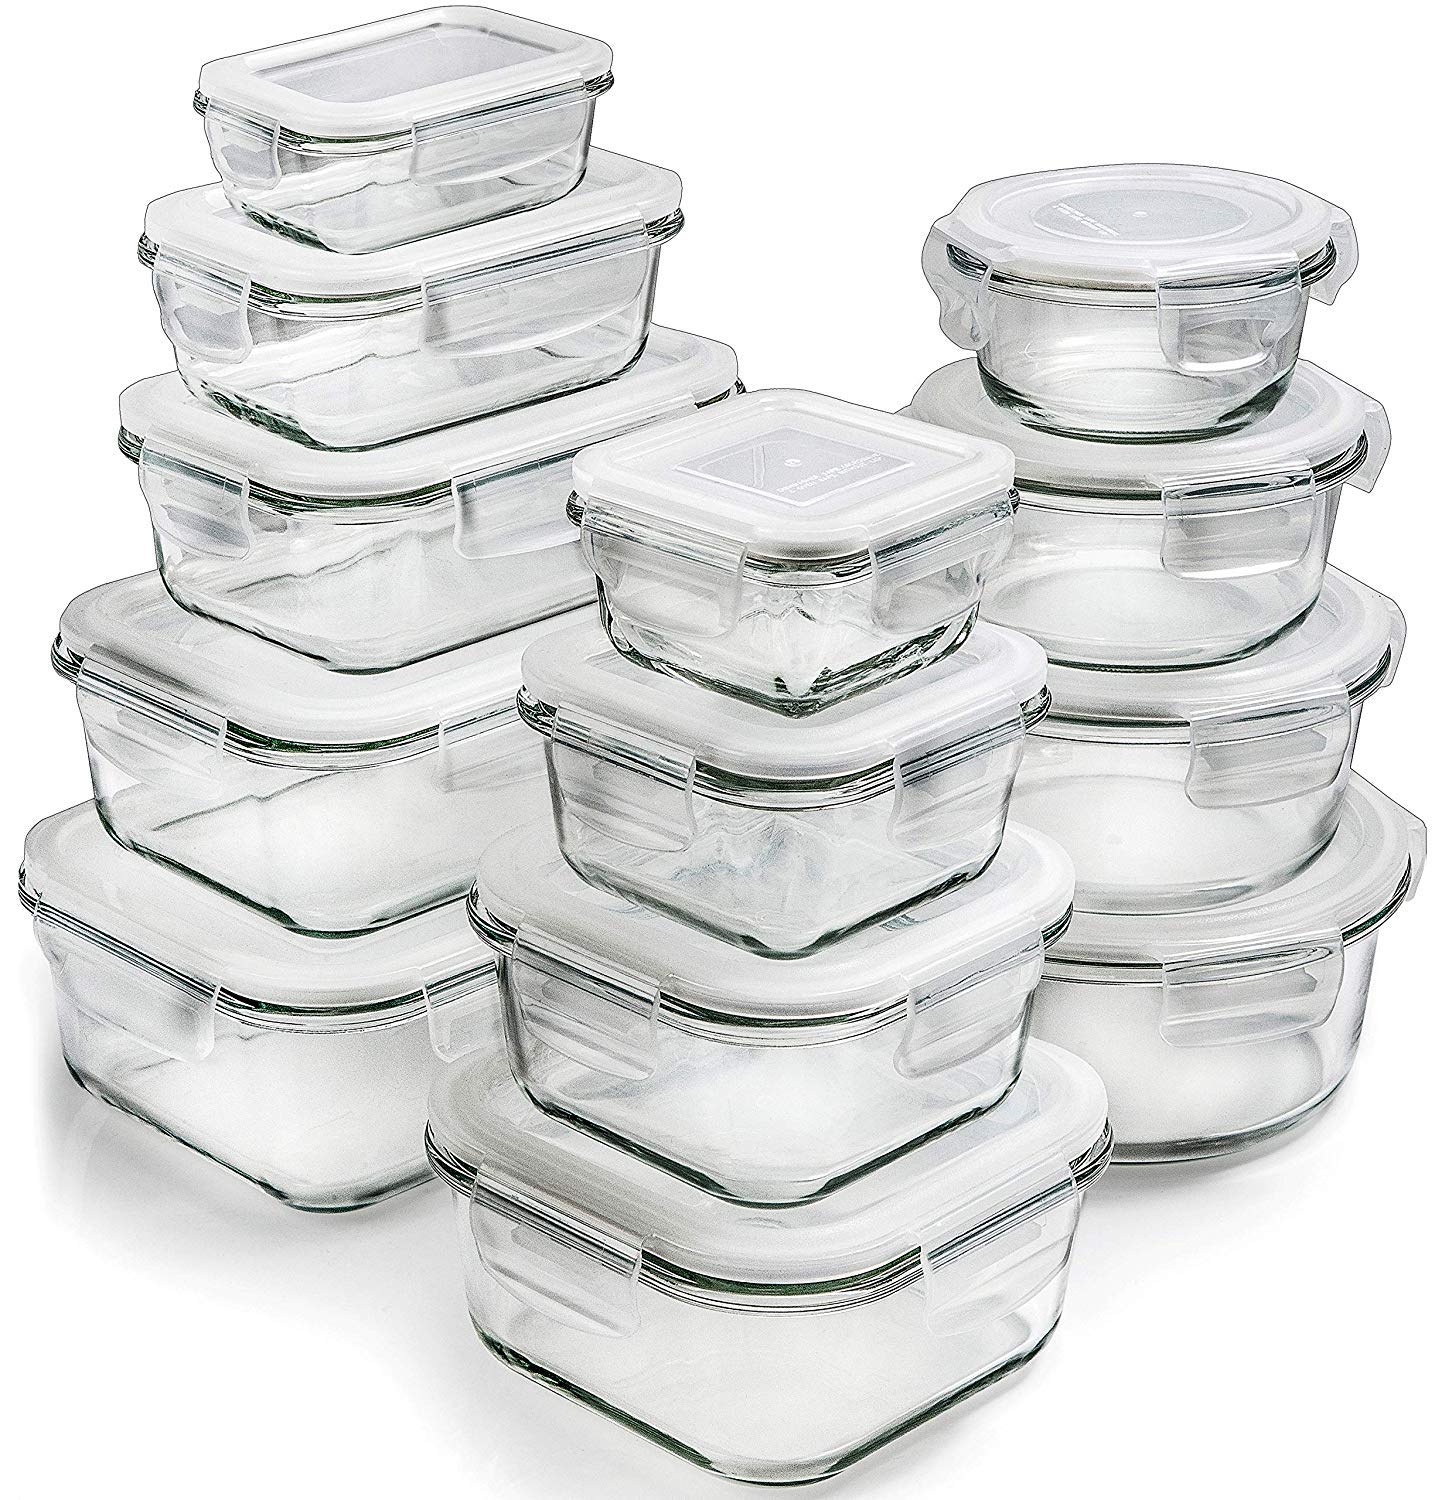 50pk,740ml Food Storage Containers with Lids Food Containers  Meal Prep Pl 価格比較